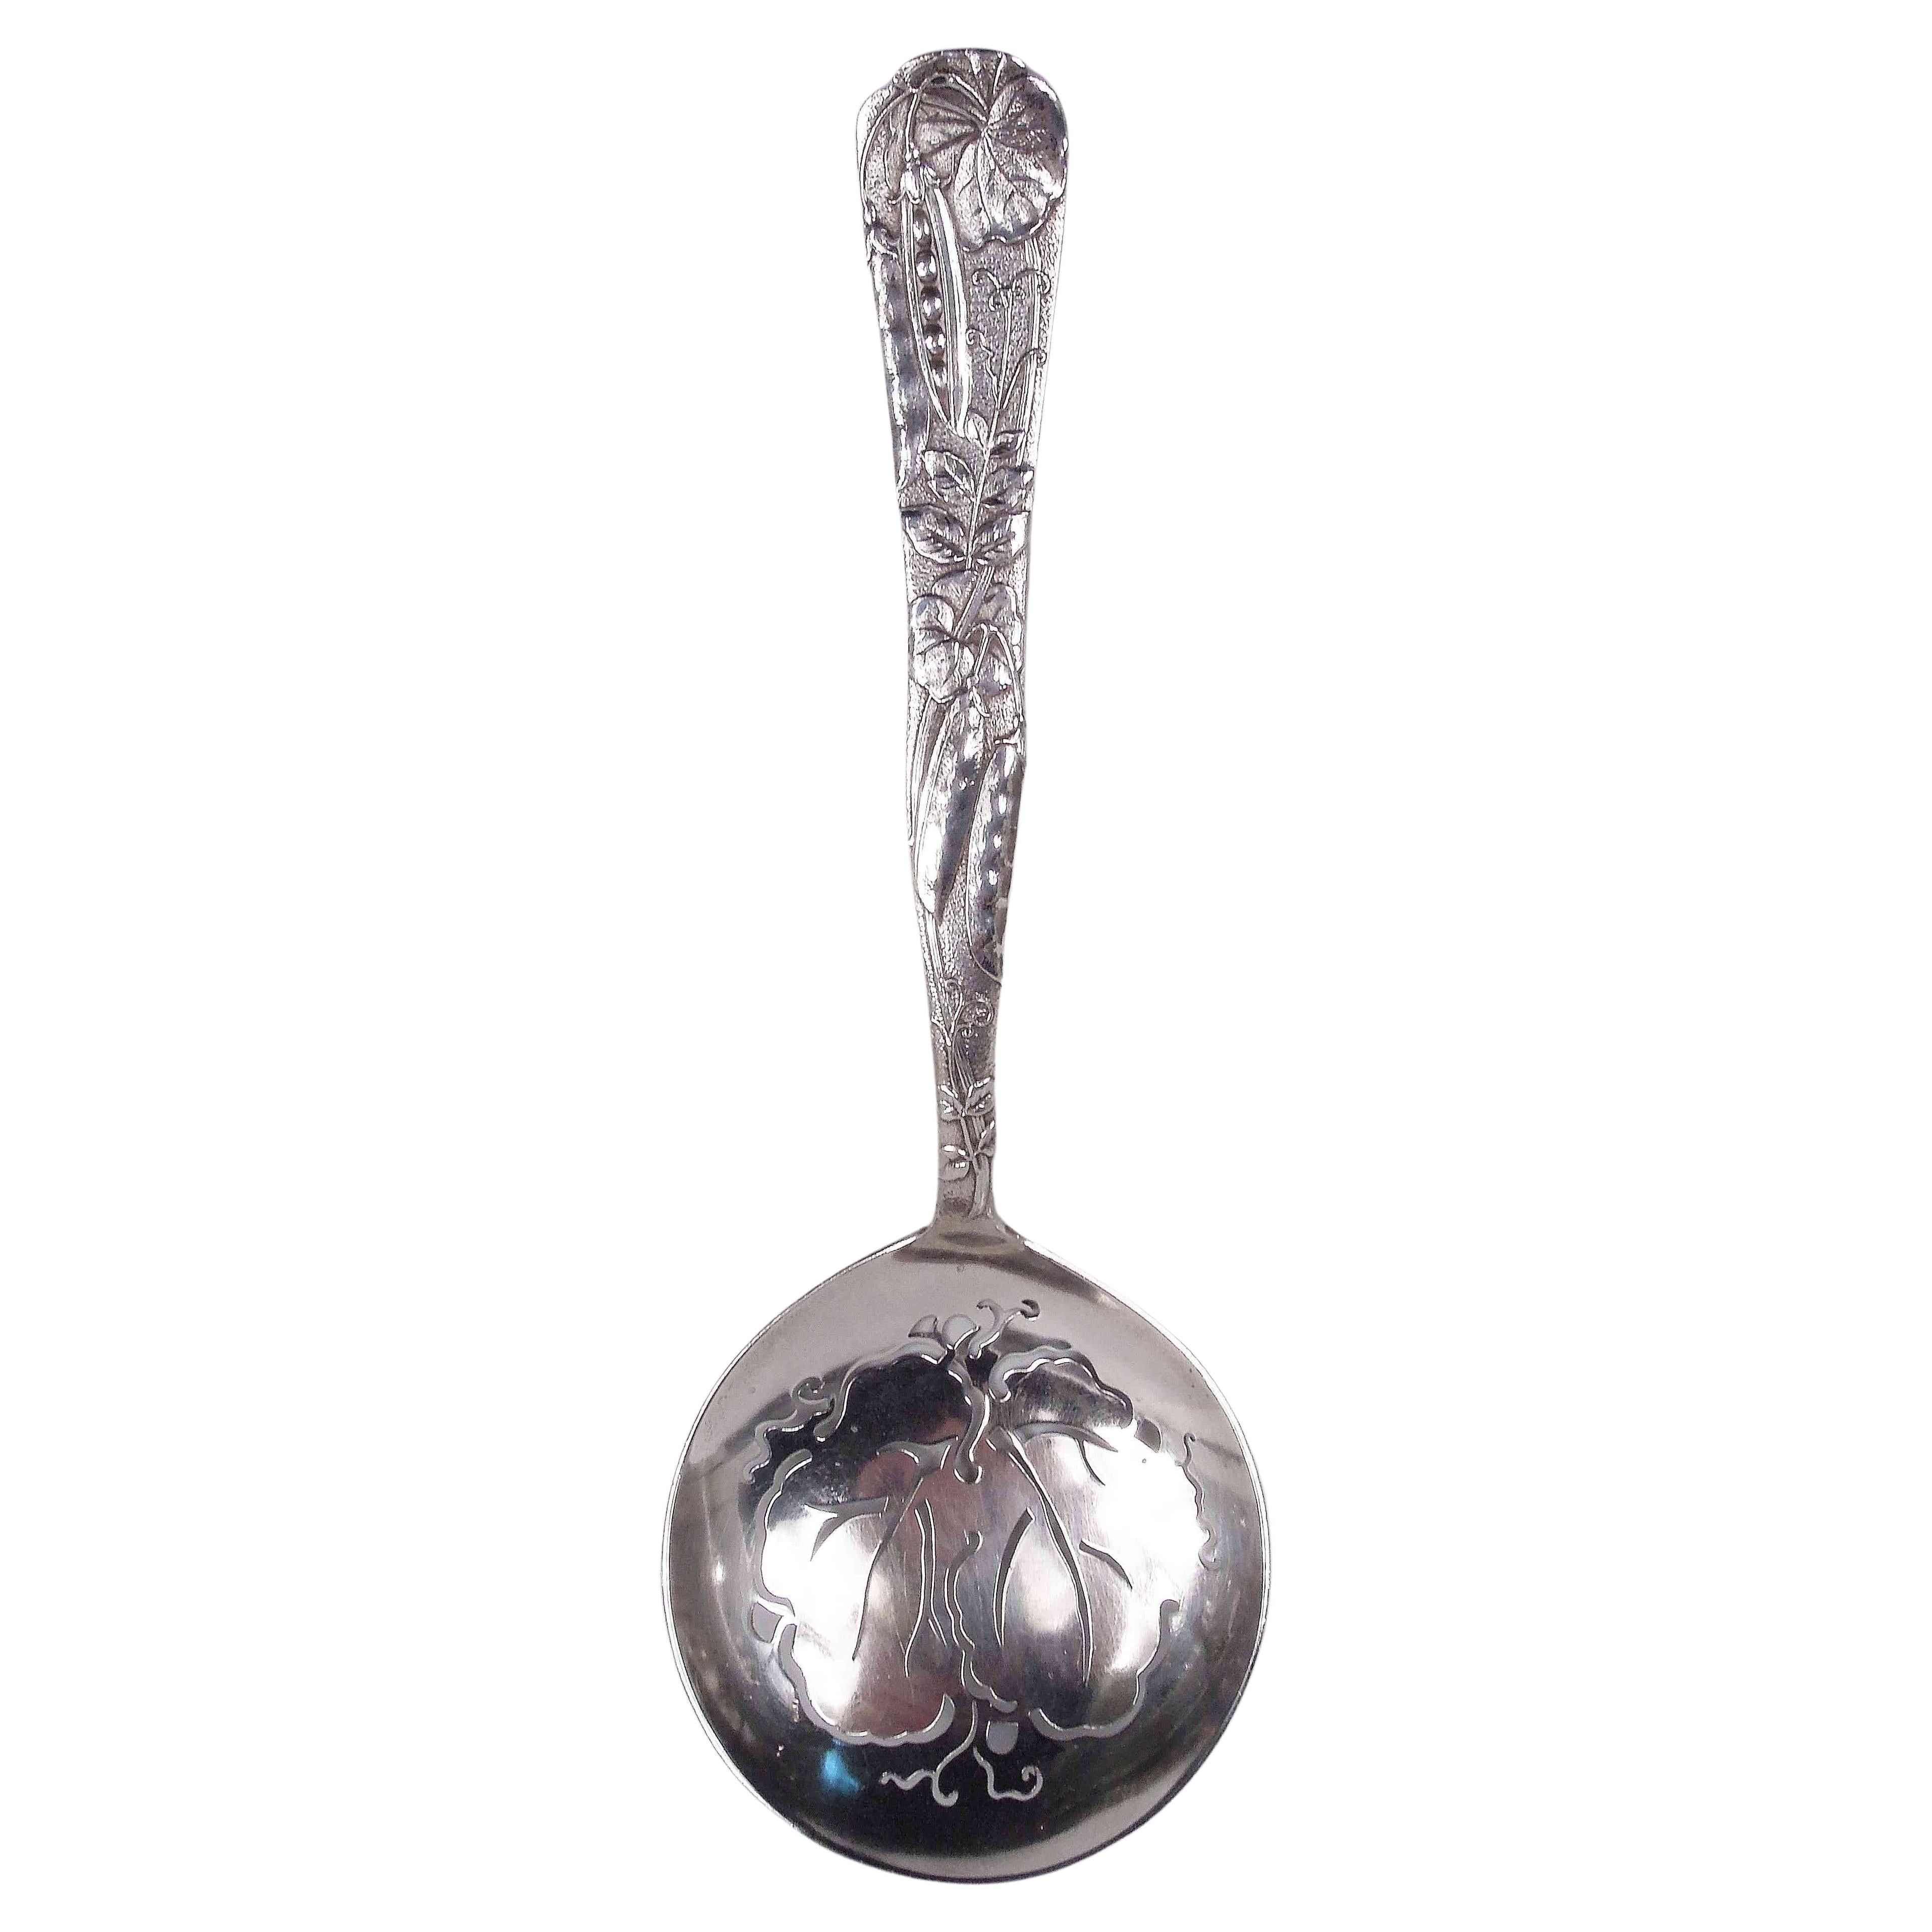 Antique Tiffany Fruits & Flowers Sterling Silver Peapod Pea Server For Sale